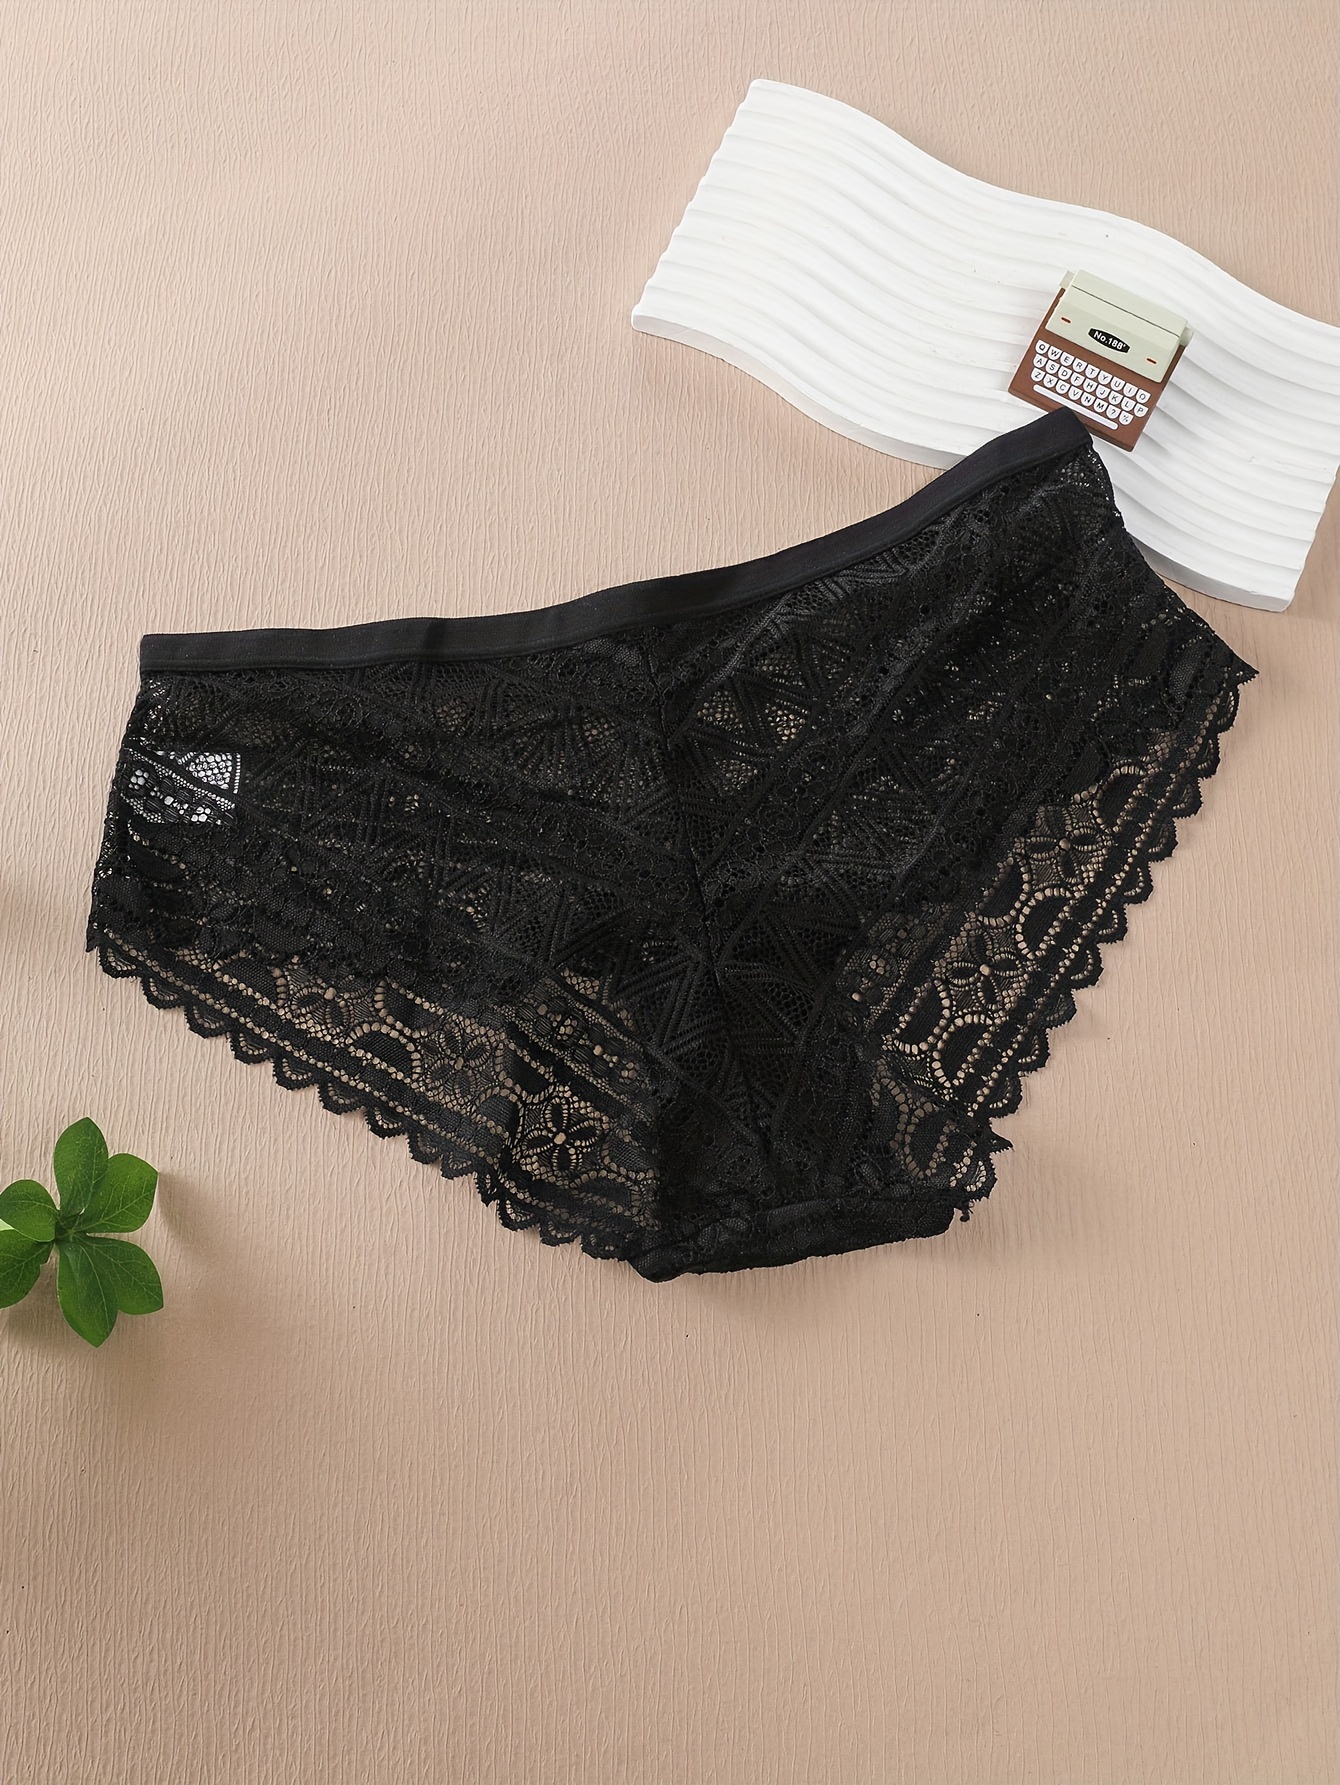 Floral Lace Plus Size Seamless Lace Panties Sexy Seamless Low